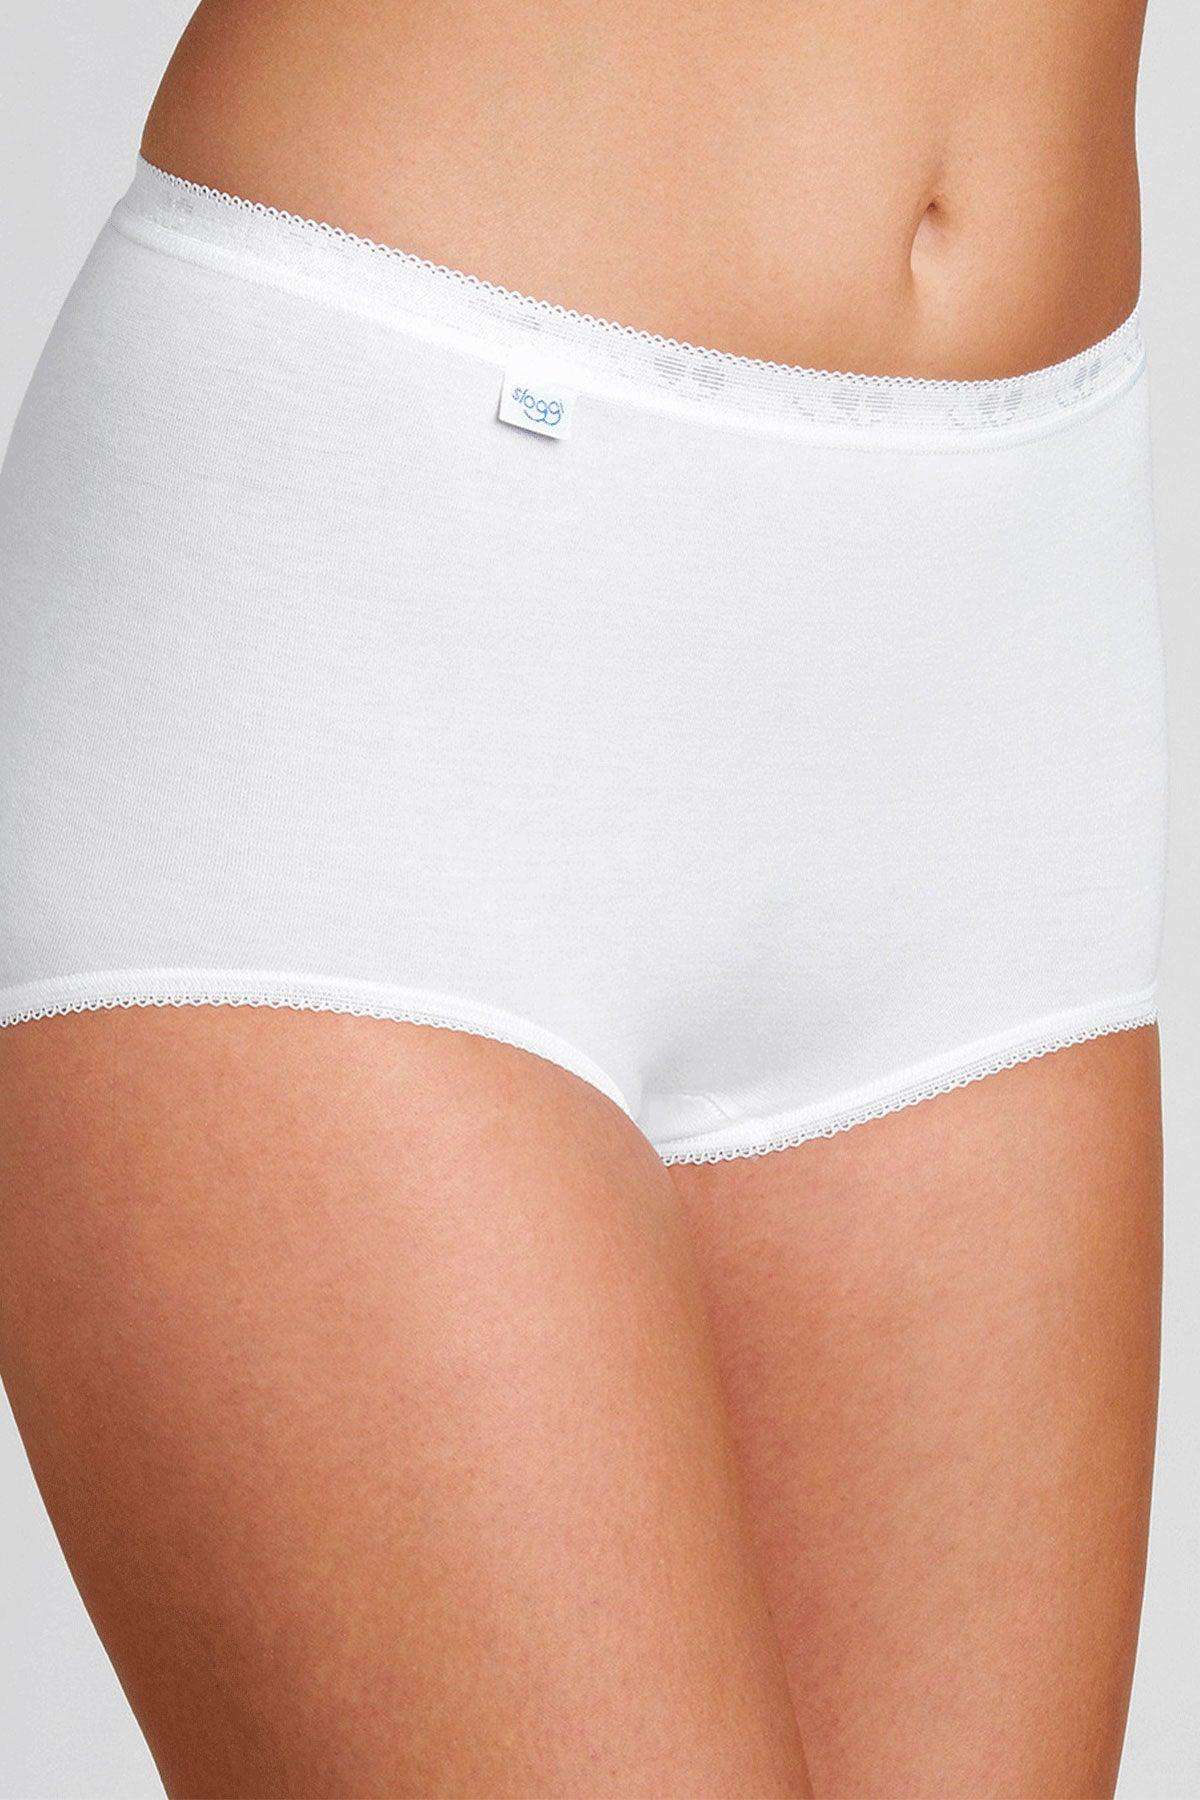 Buy Sloggi Double Comfort Maxi Briefs 2 Pack from Next Canada